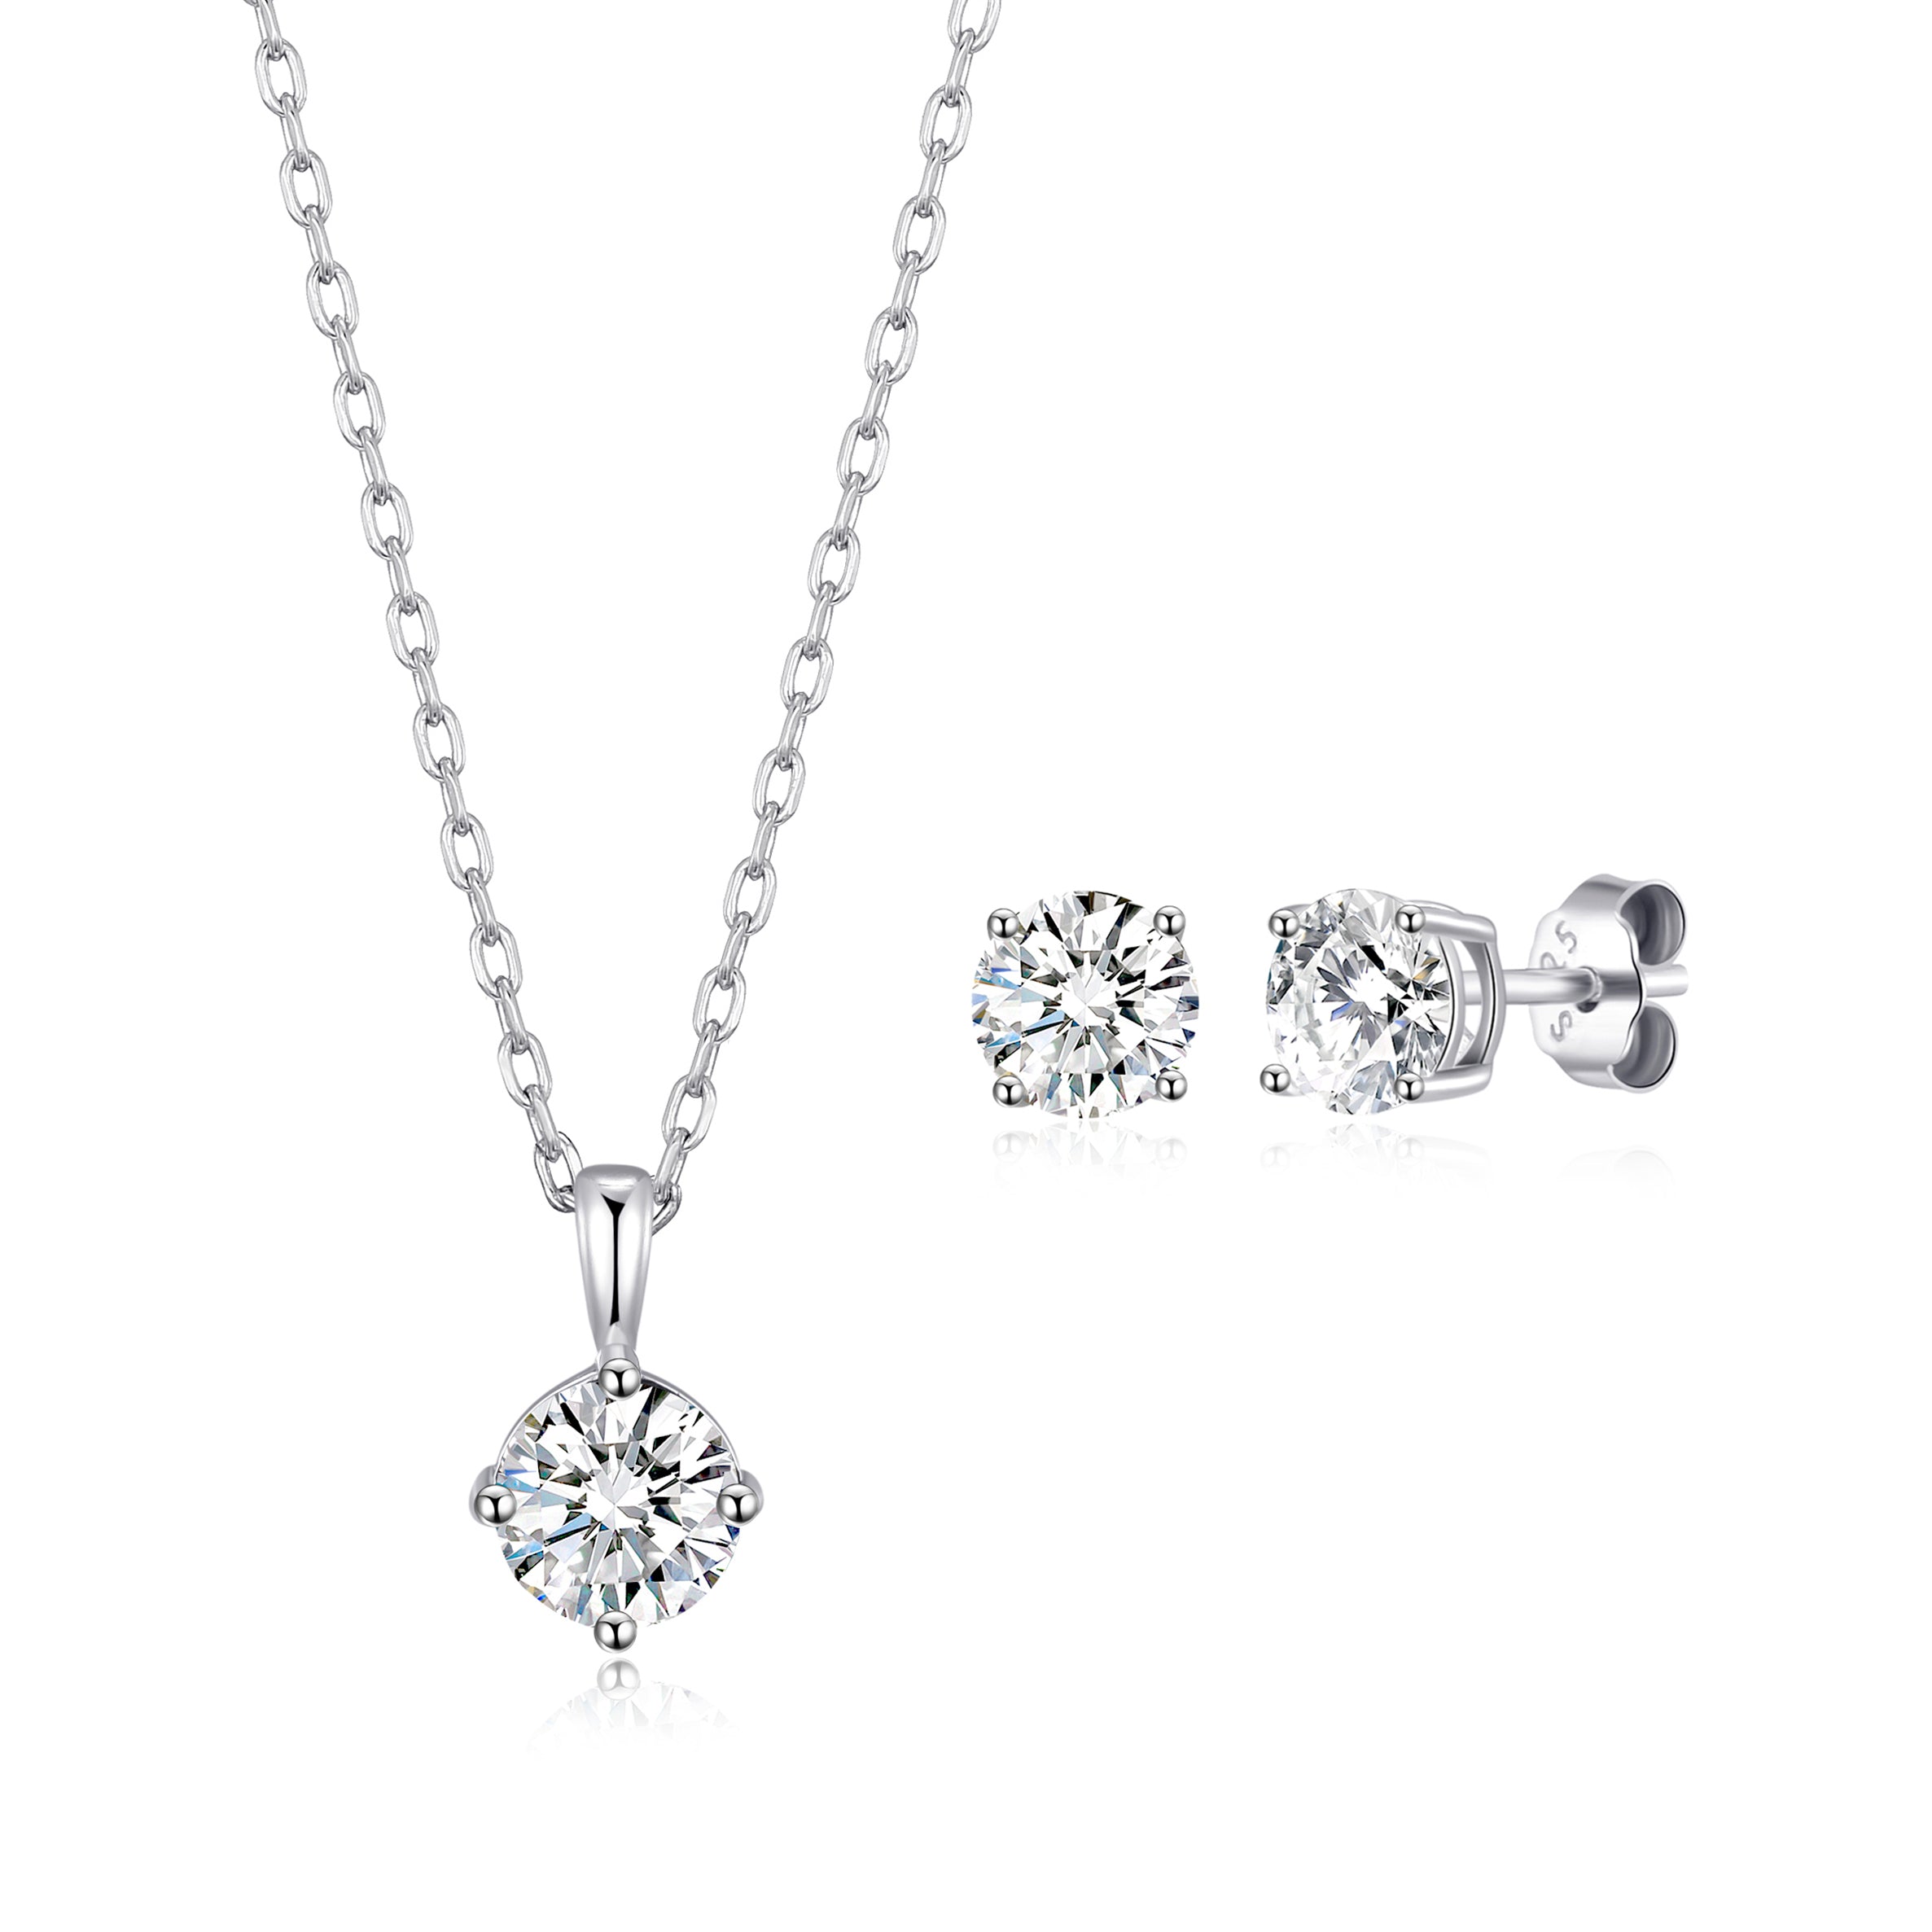 Sterling Silver April (Diamond) Birthstone Necklace & Earrings Set Created with Zircondia® Crystals by Philip Jones Jewellery